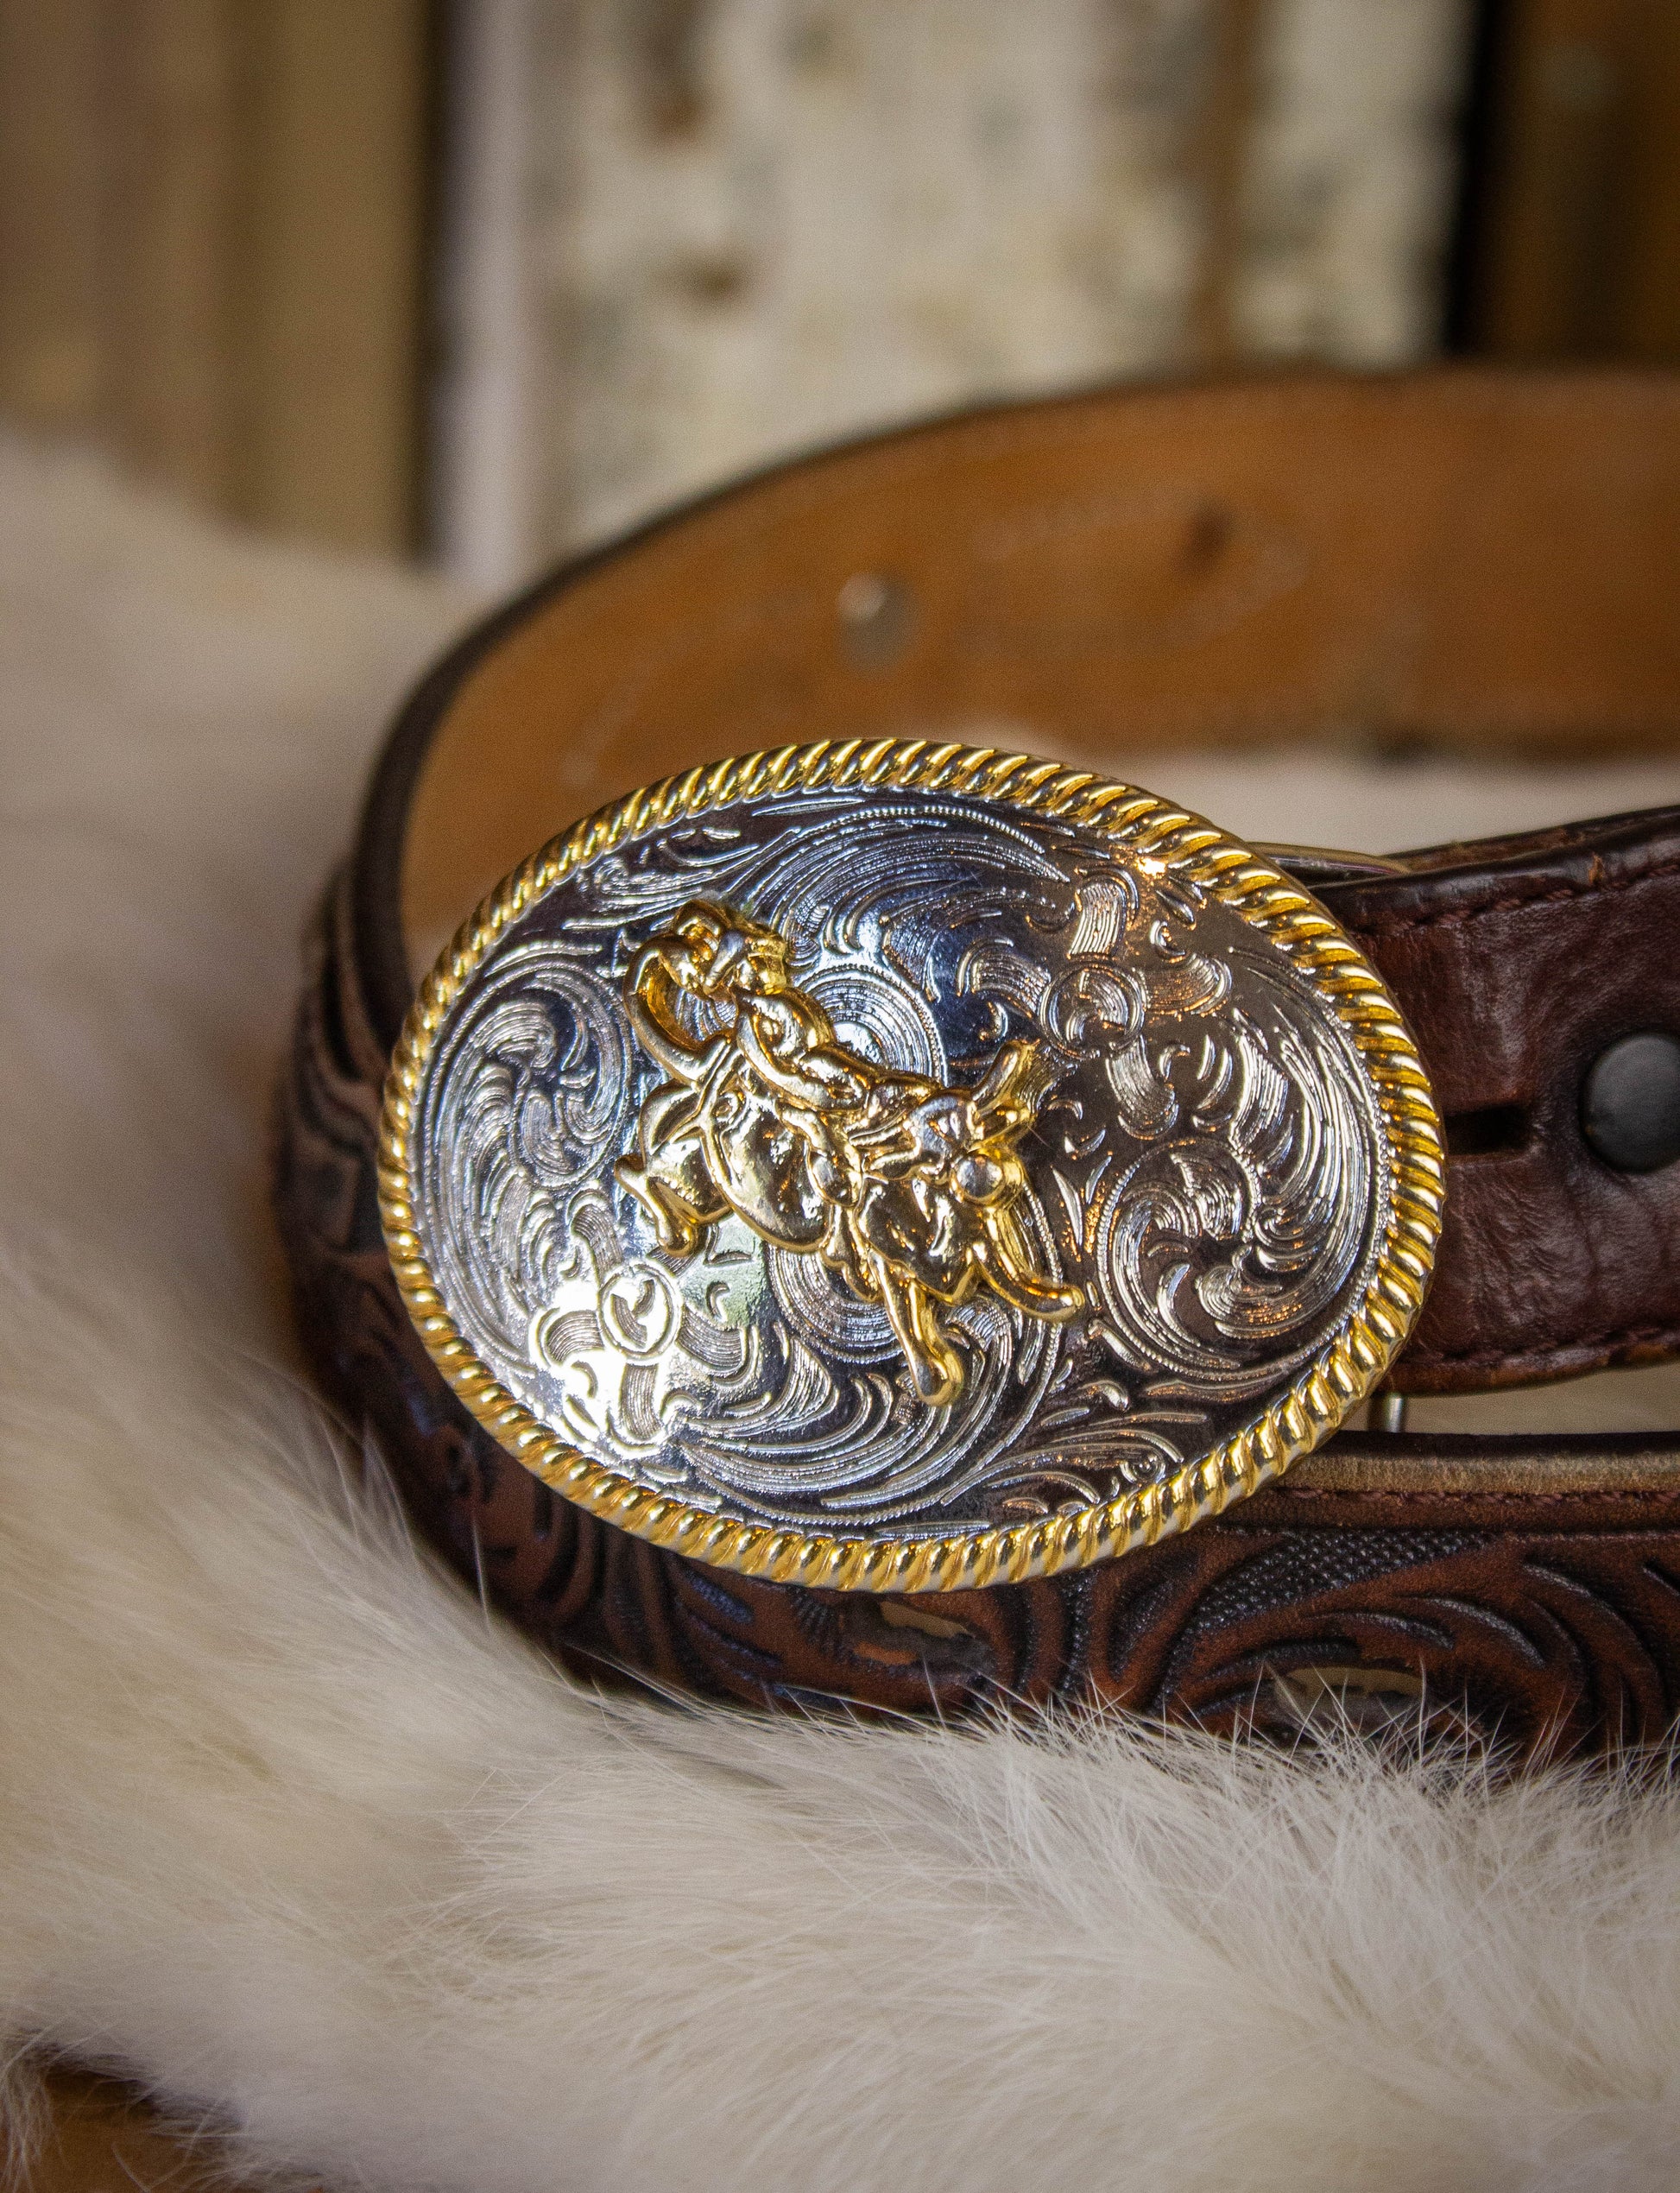 The Davidson Leather Belt – Buckle and Hide Leather LLC